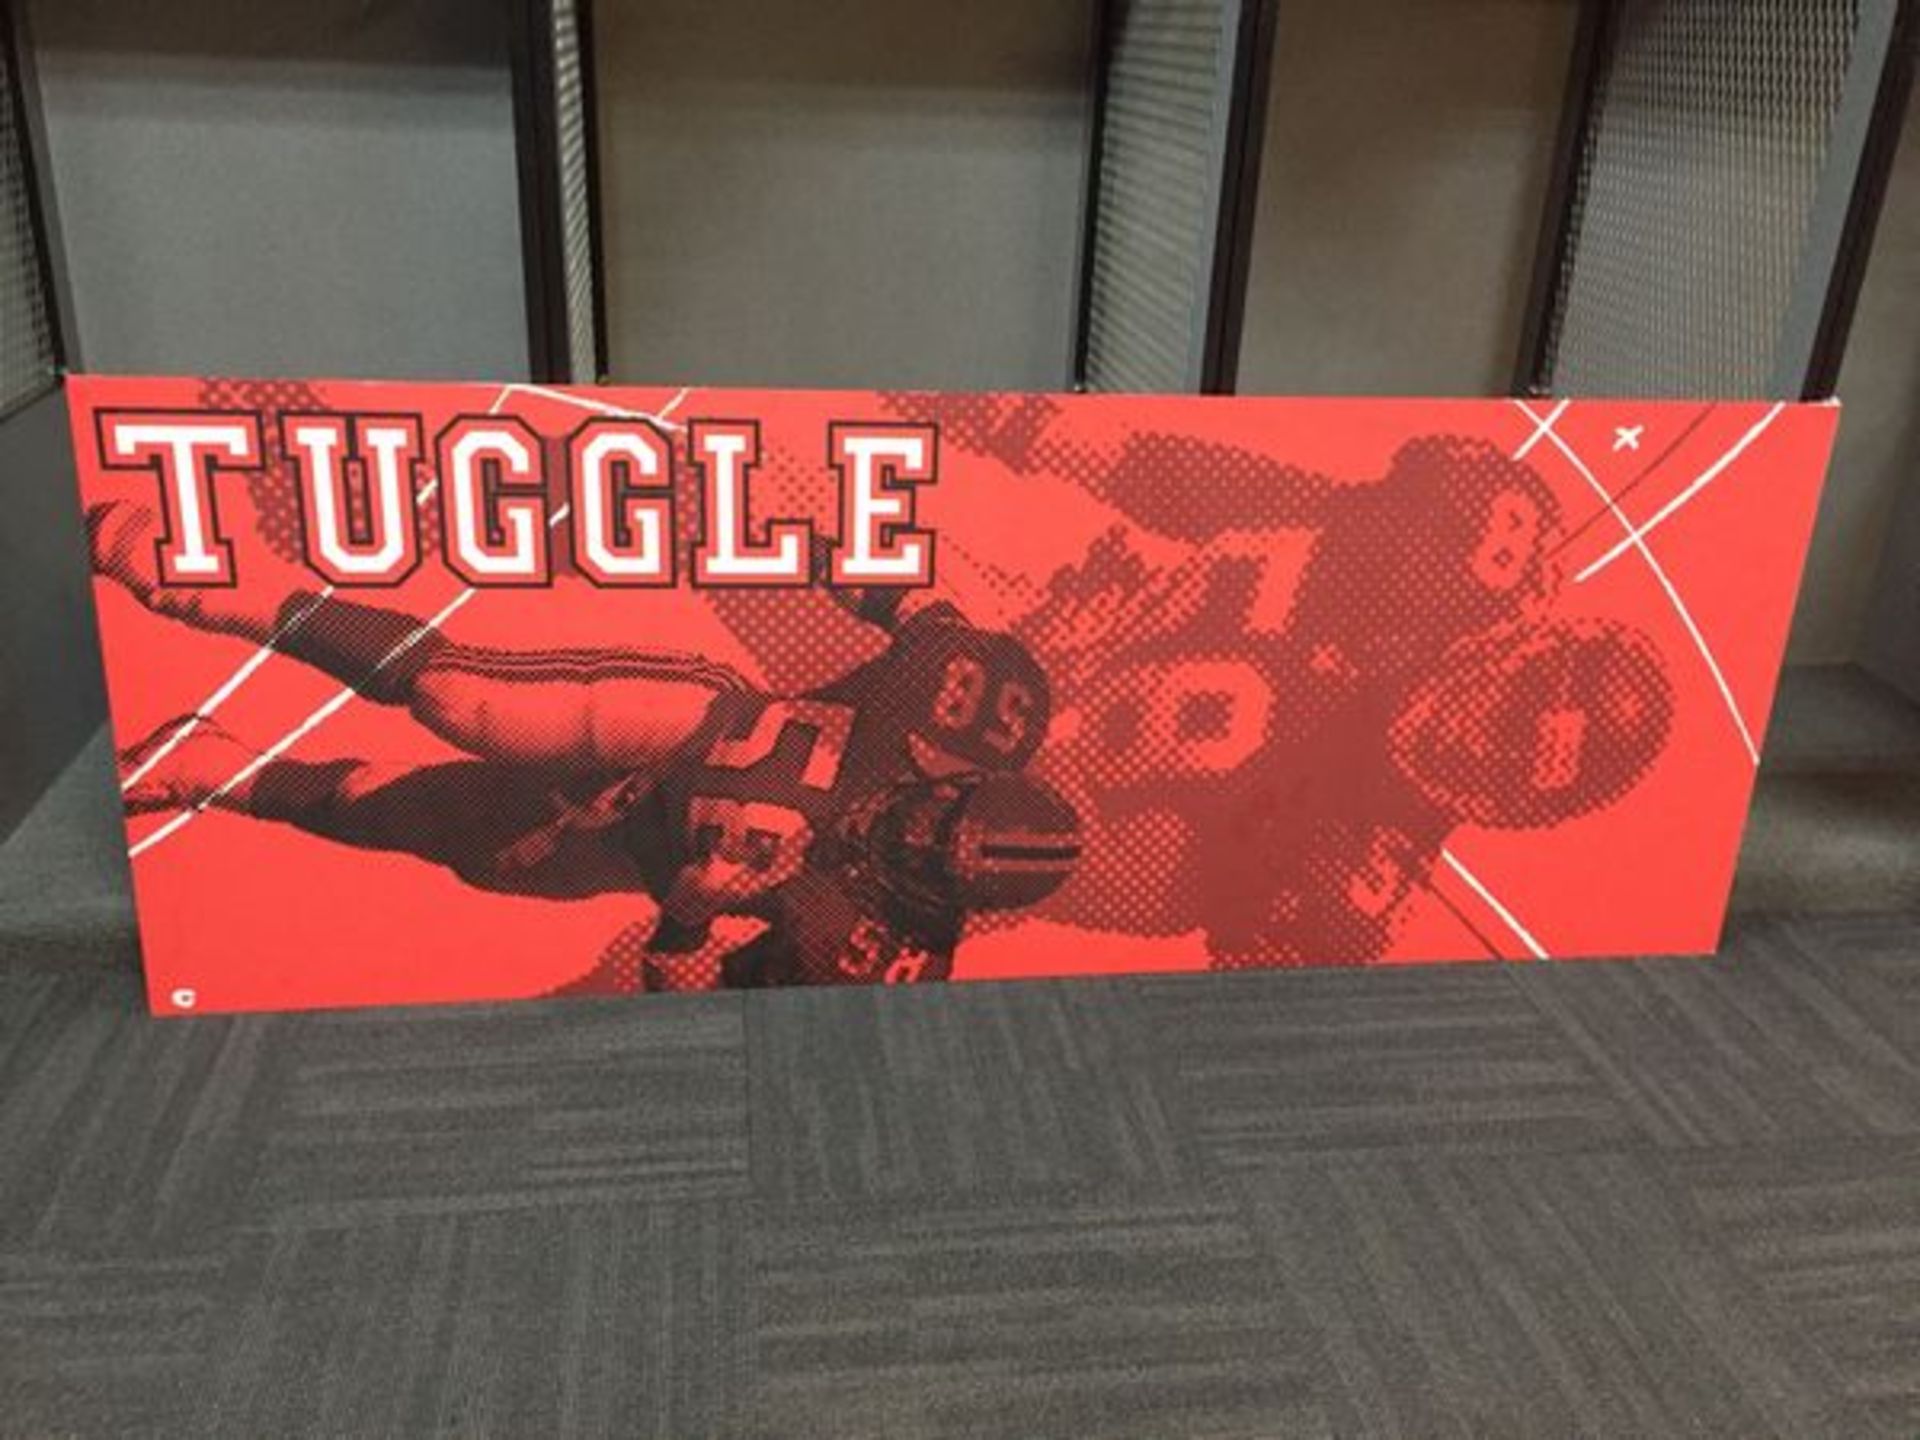 Tuggle Ring of Honor Poster from Concourse / GA DOME ITEM / This item includes Georgia Dome - Image 2 of 2